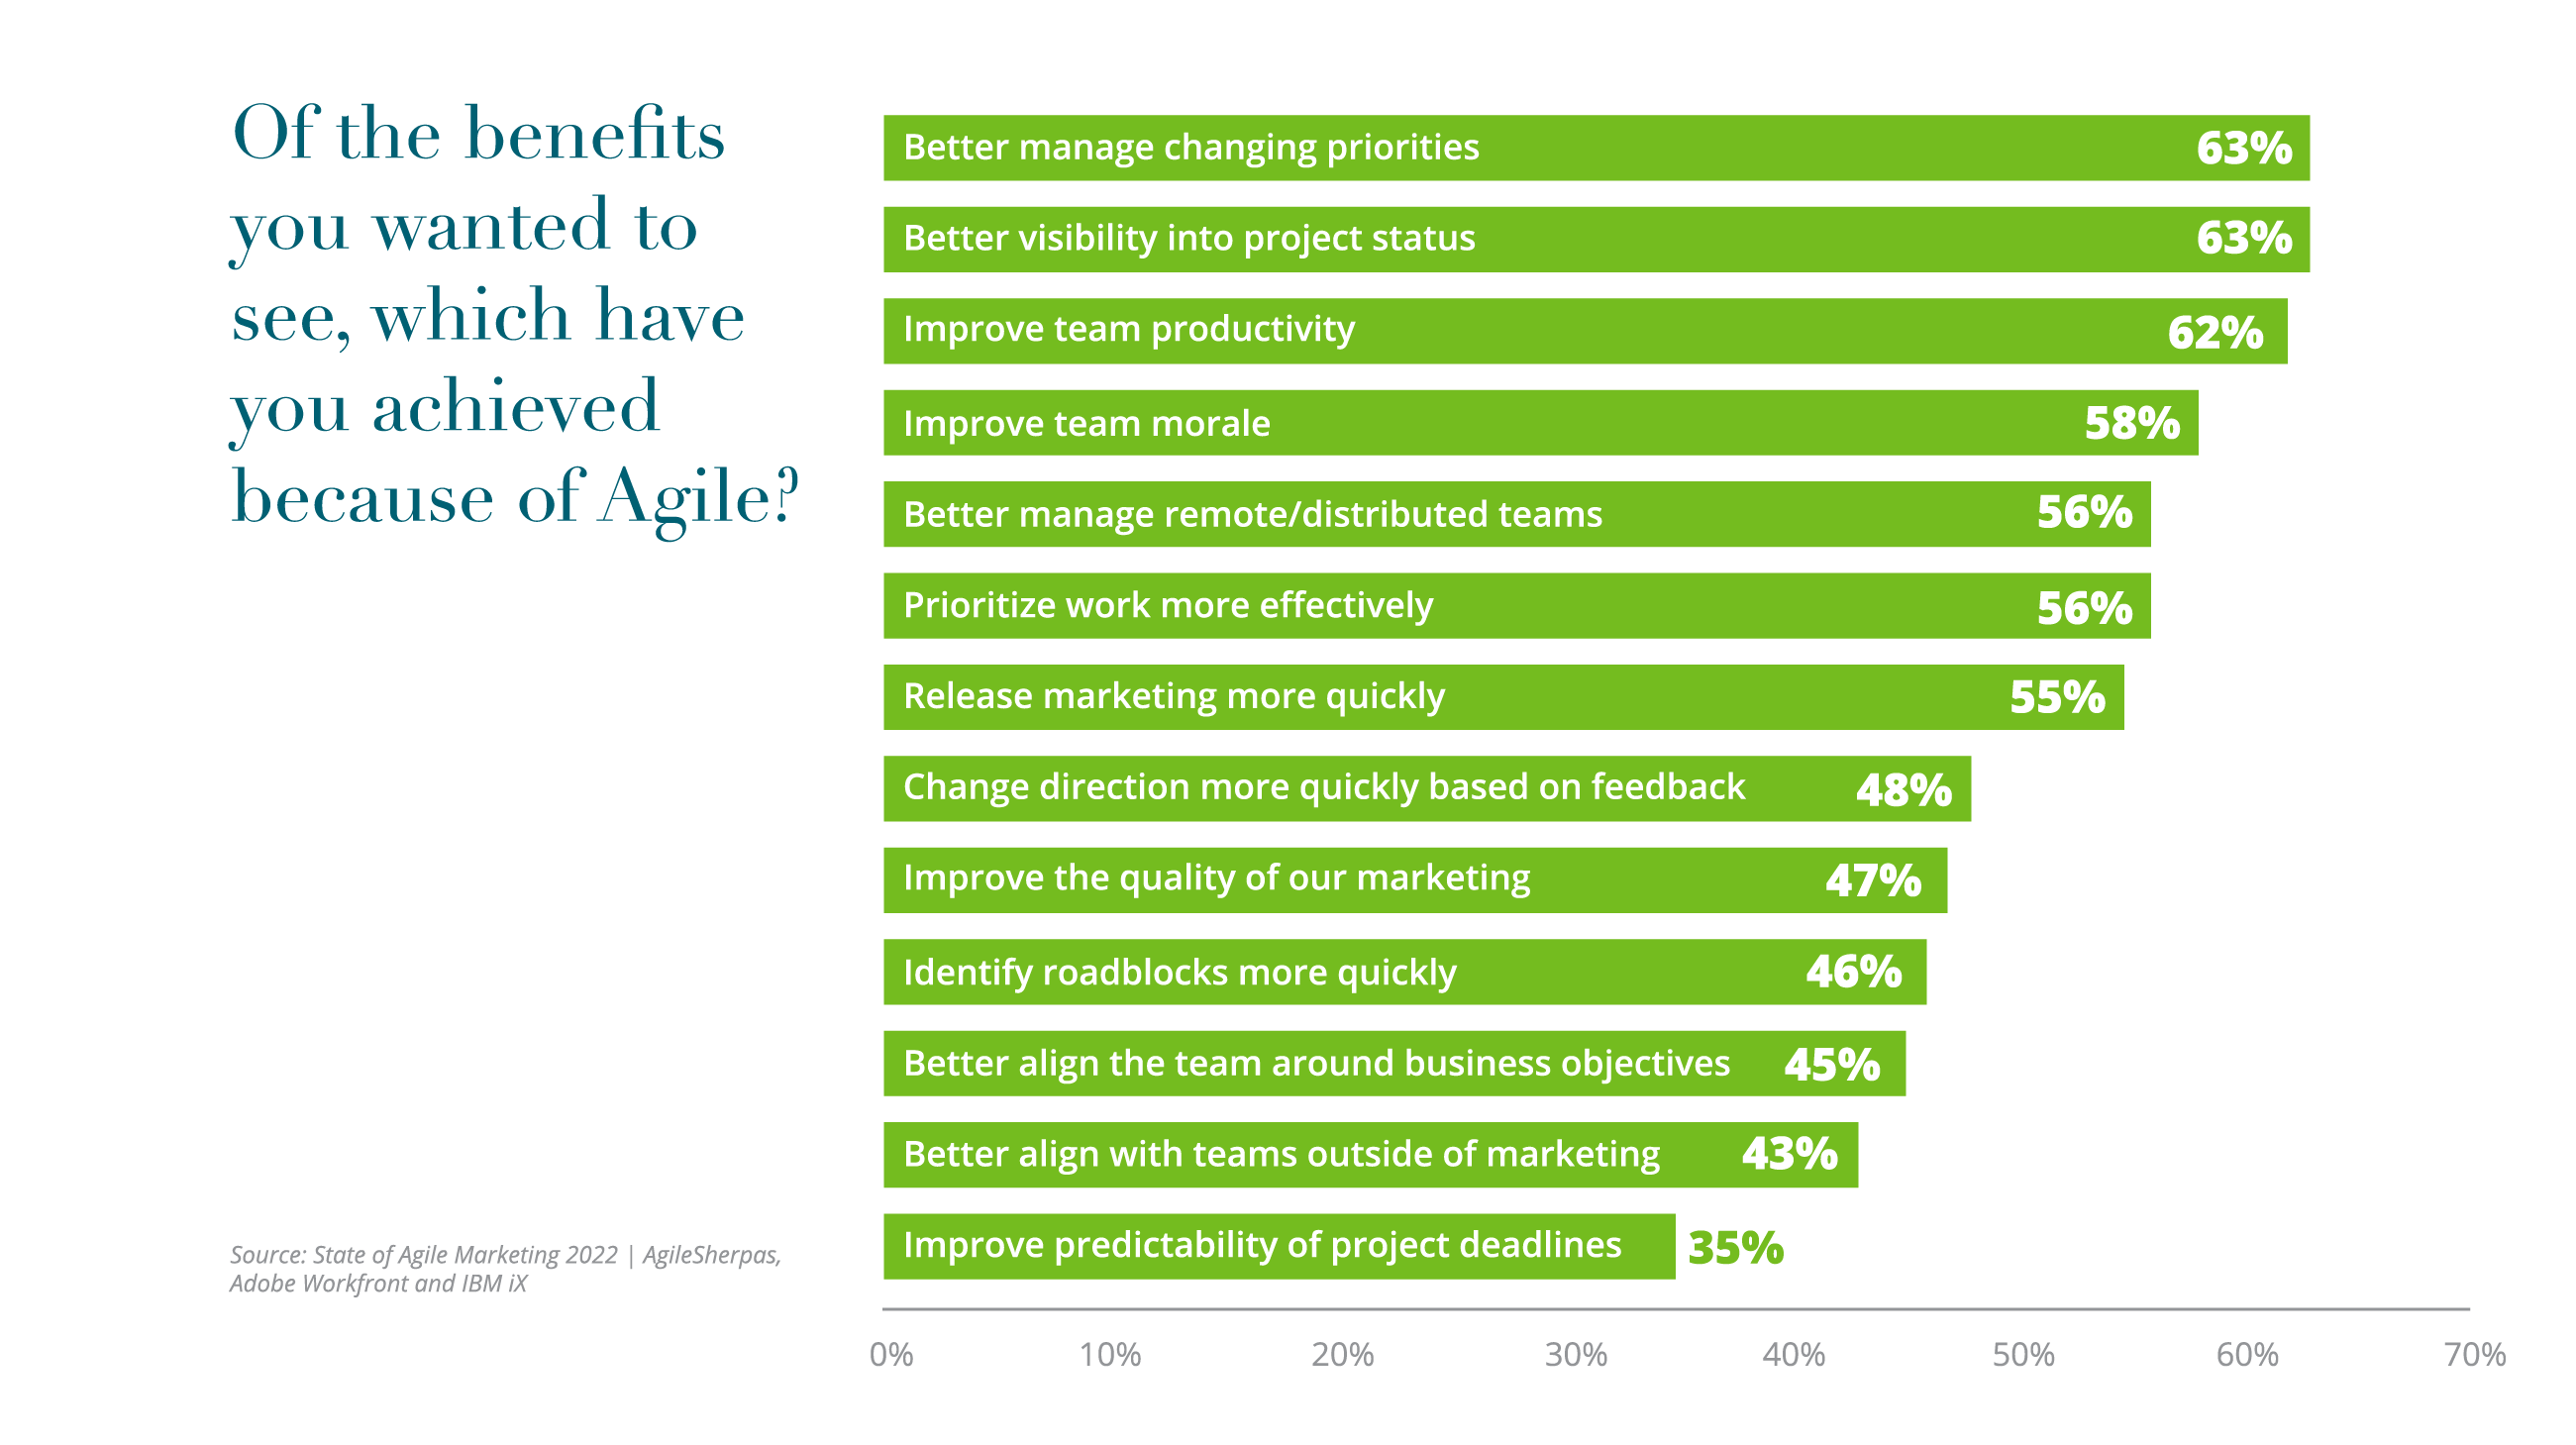 Annual State of Agile Marketing Report 2022 Of the benefits you wanted to see, which have you achieved because of agile?